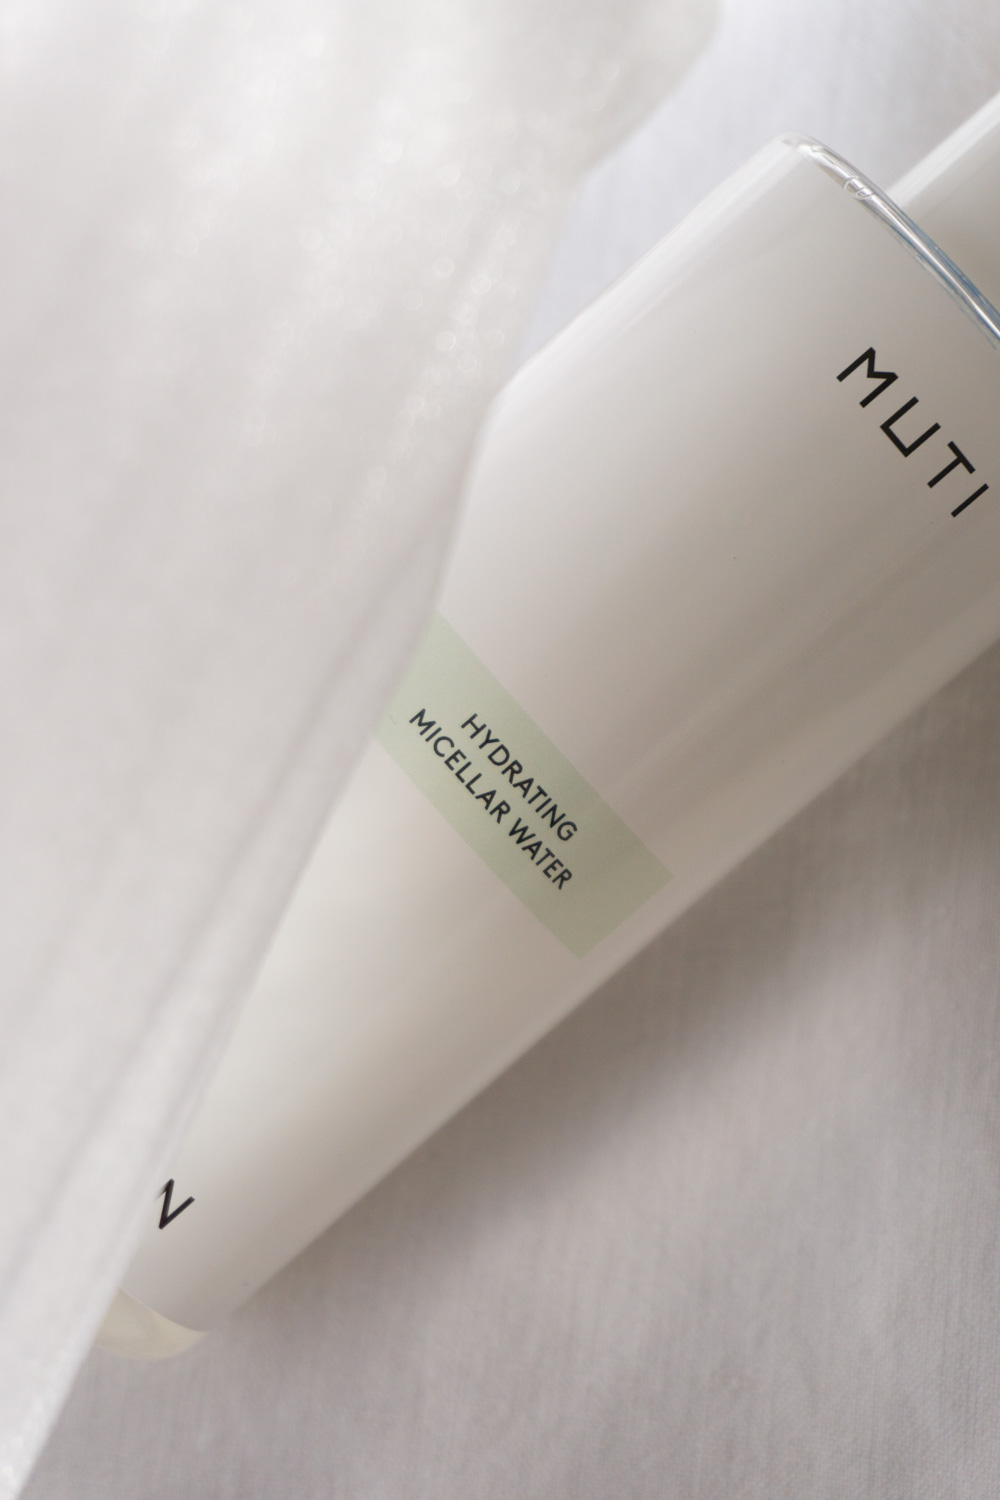 MUTI Skincare - Clean Facial Cleanser, Minimalist Everyday Skincare Routine | Natural Beauty, Packaging Design, Product Photography, Light & Shadows, Shadow Play - Slow Living & Self Care | RG Daily Blog